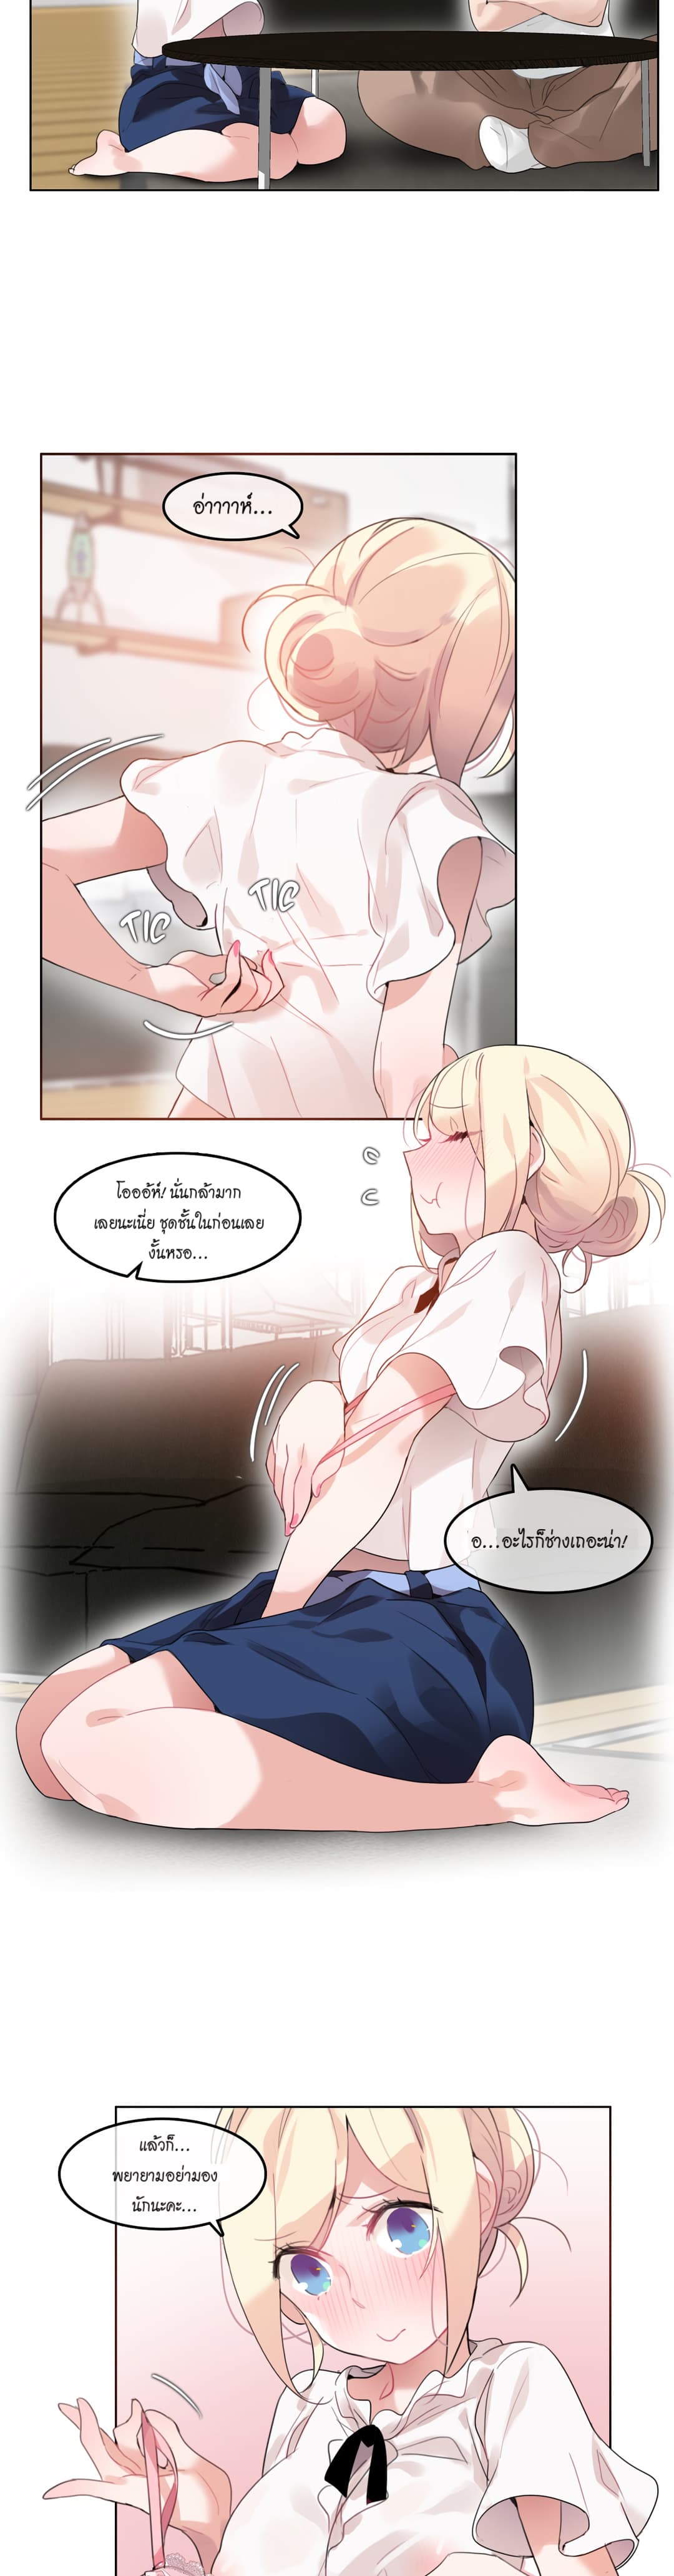 A Pervert’s Daily Life 34 (8)